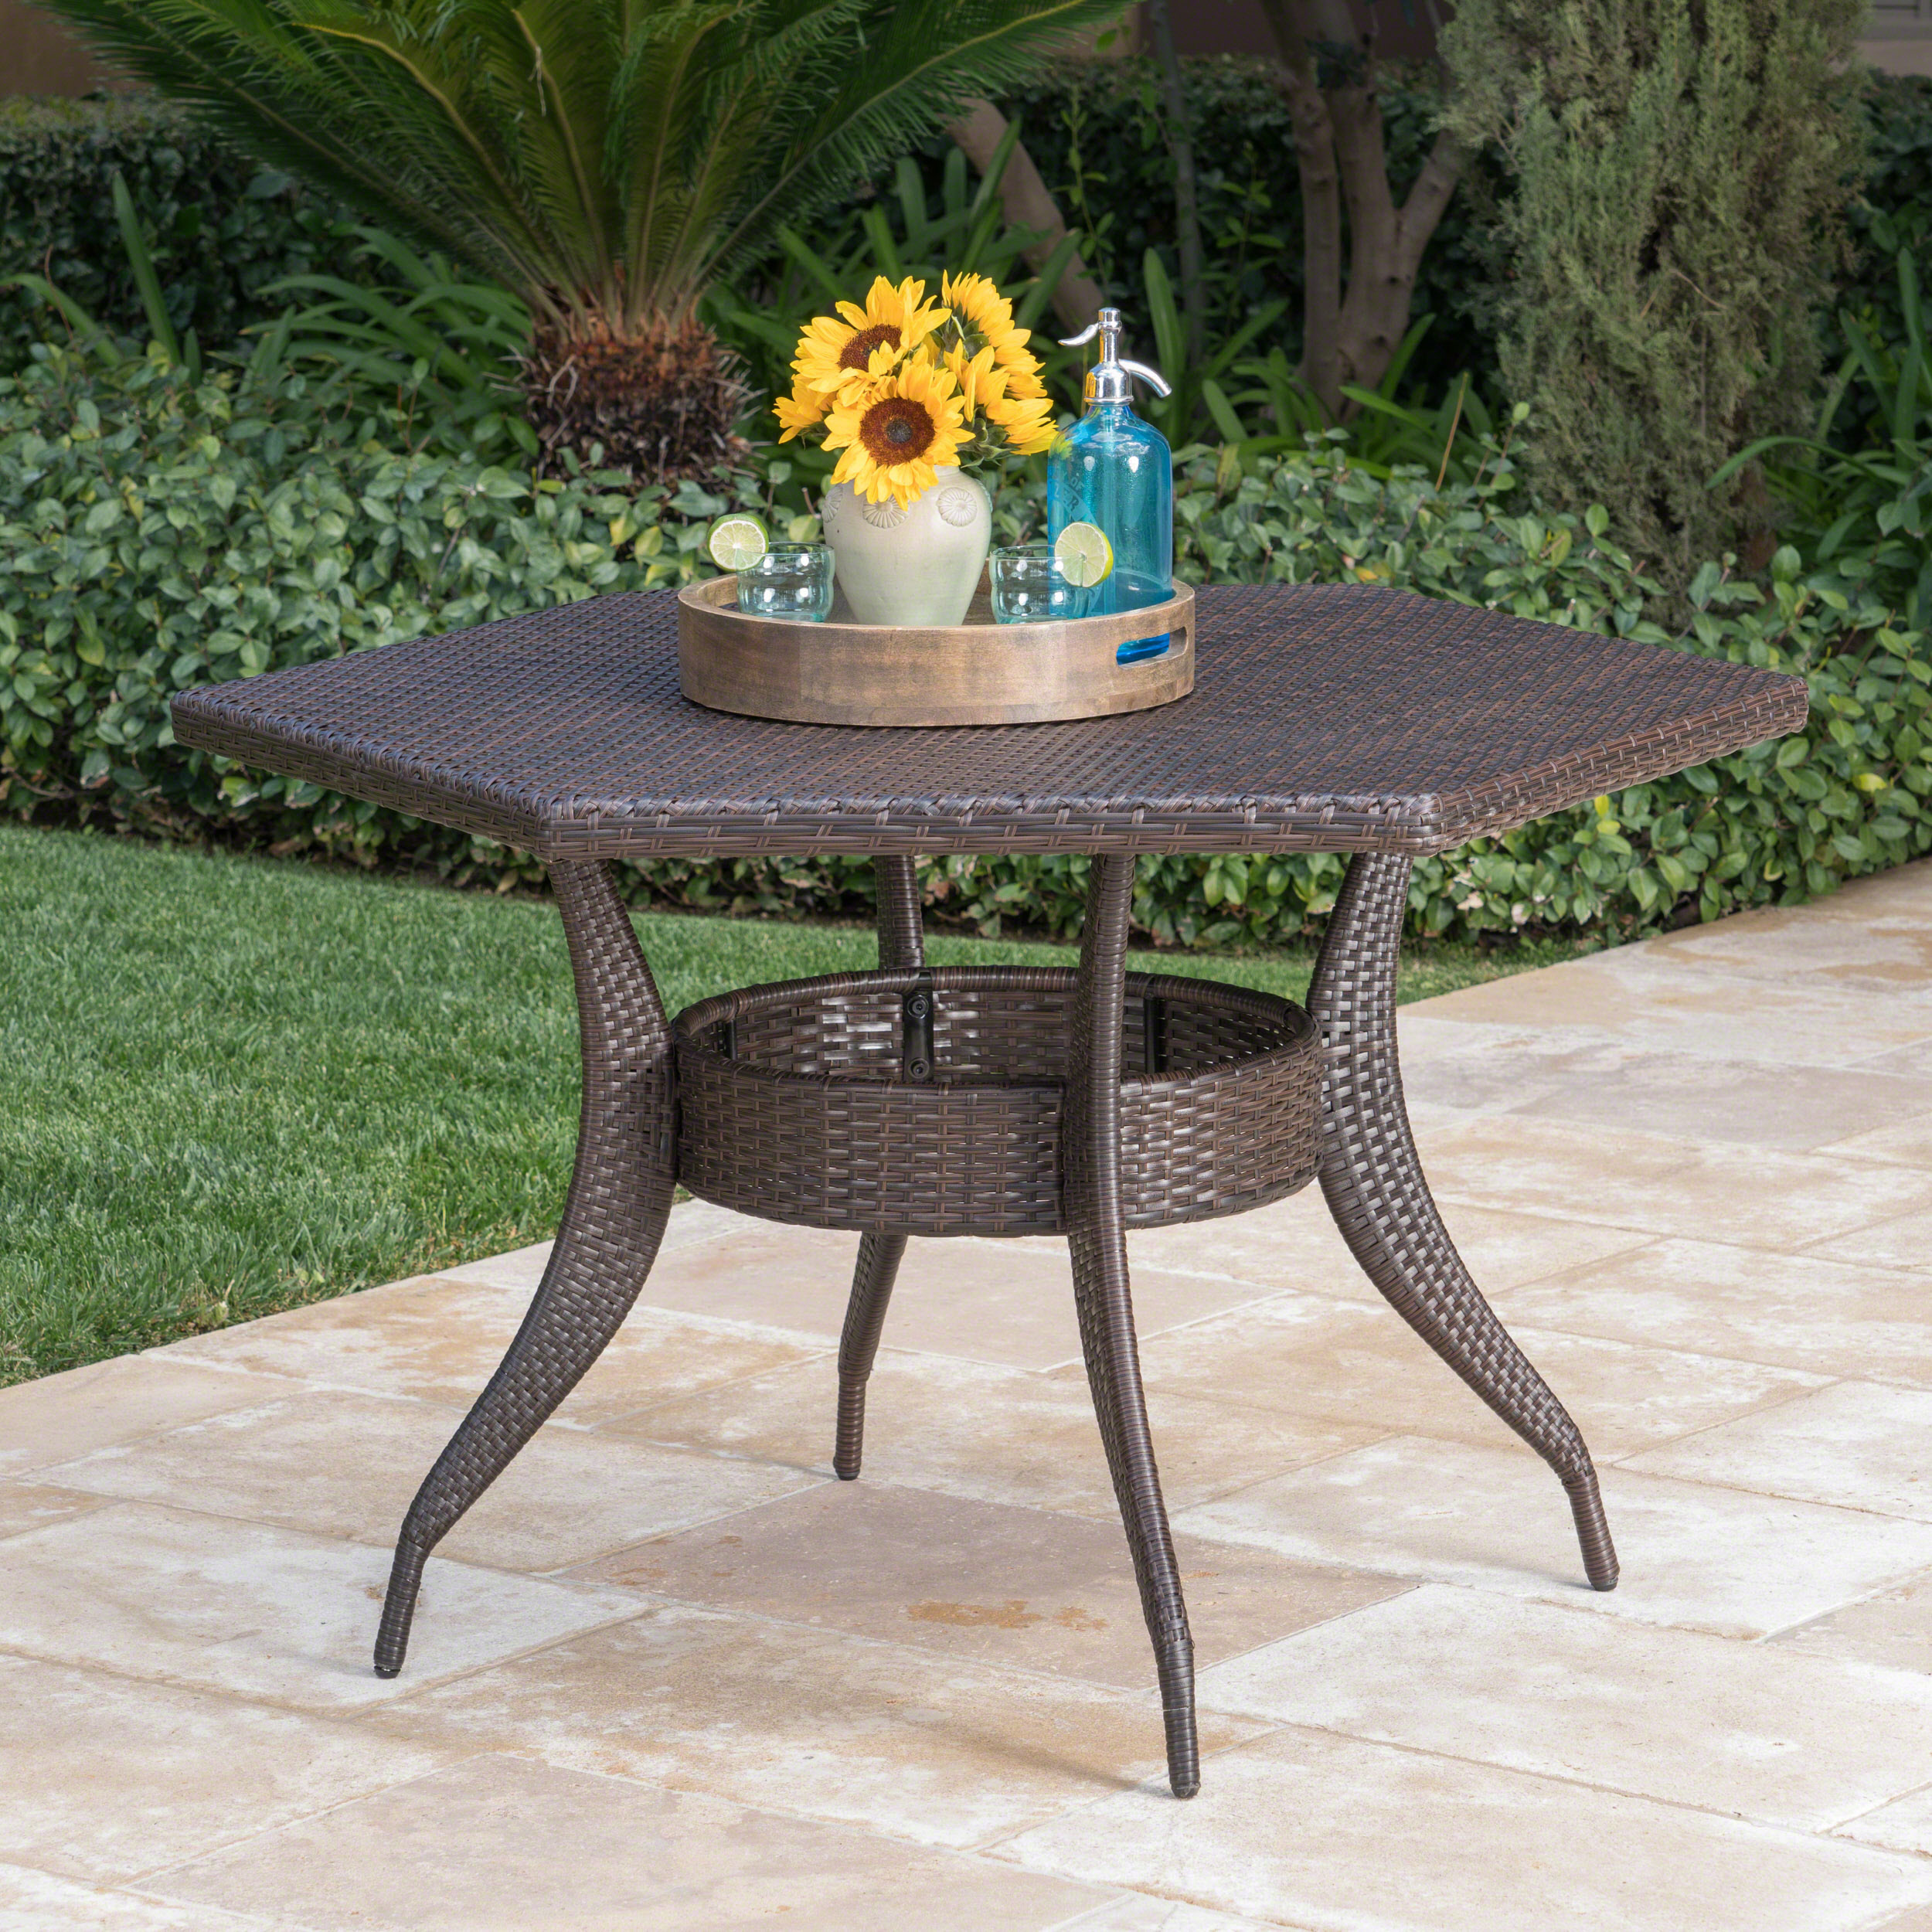 Outdoor 53-Inch Wicker Hexagon Dining Table, Multi Brown - image 5 of 9